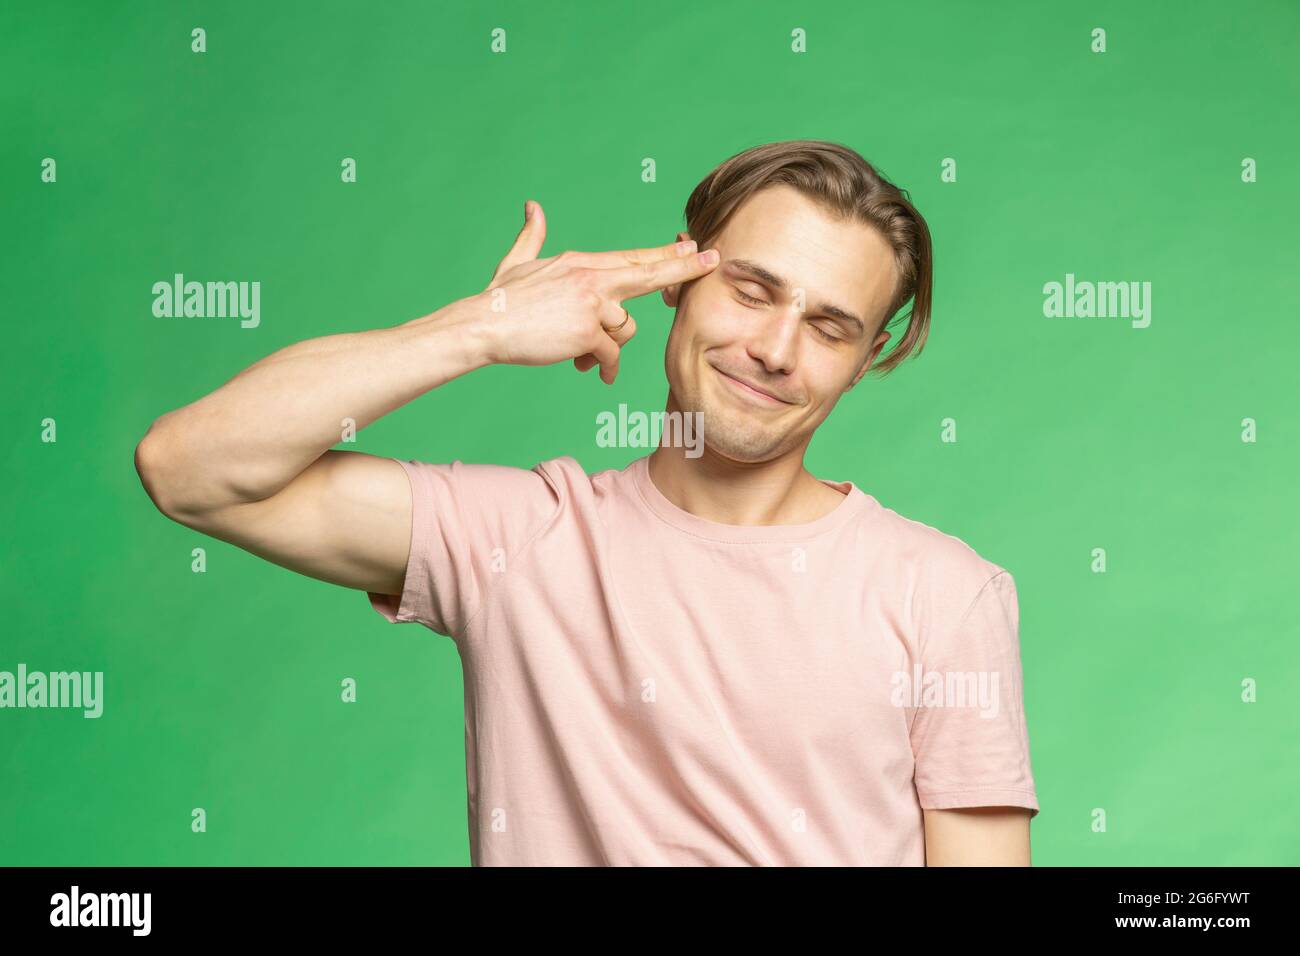 Portrait young man holding finger gun to head Stock Photo